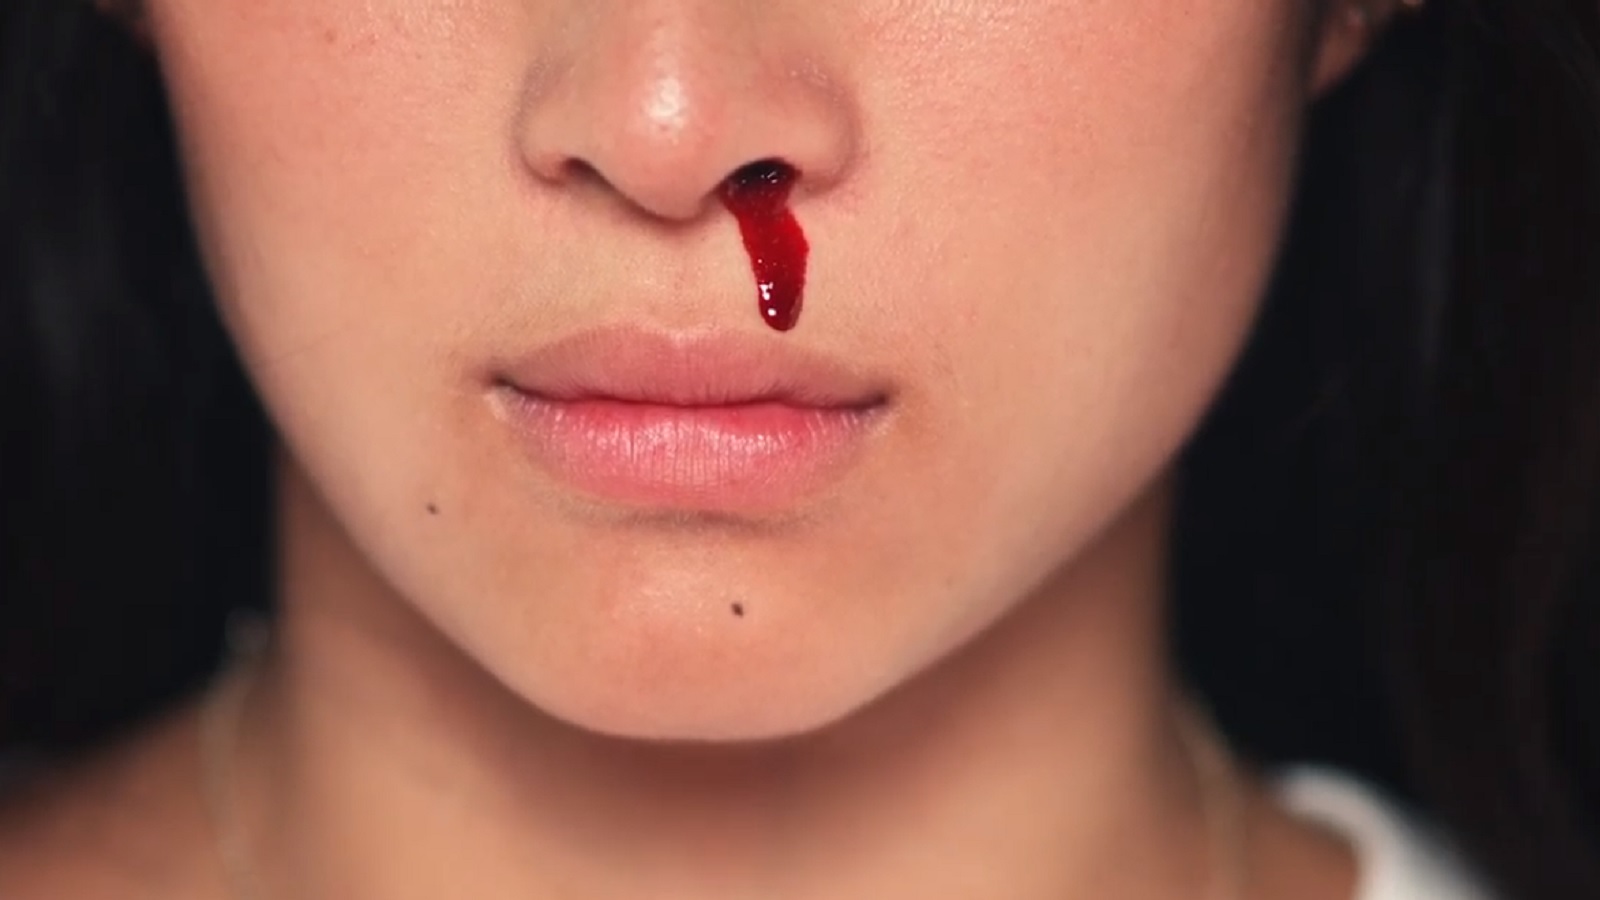 Can a Nosebleed Fix Period Poverty?